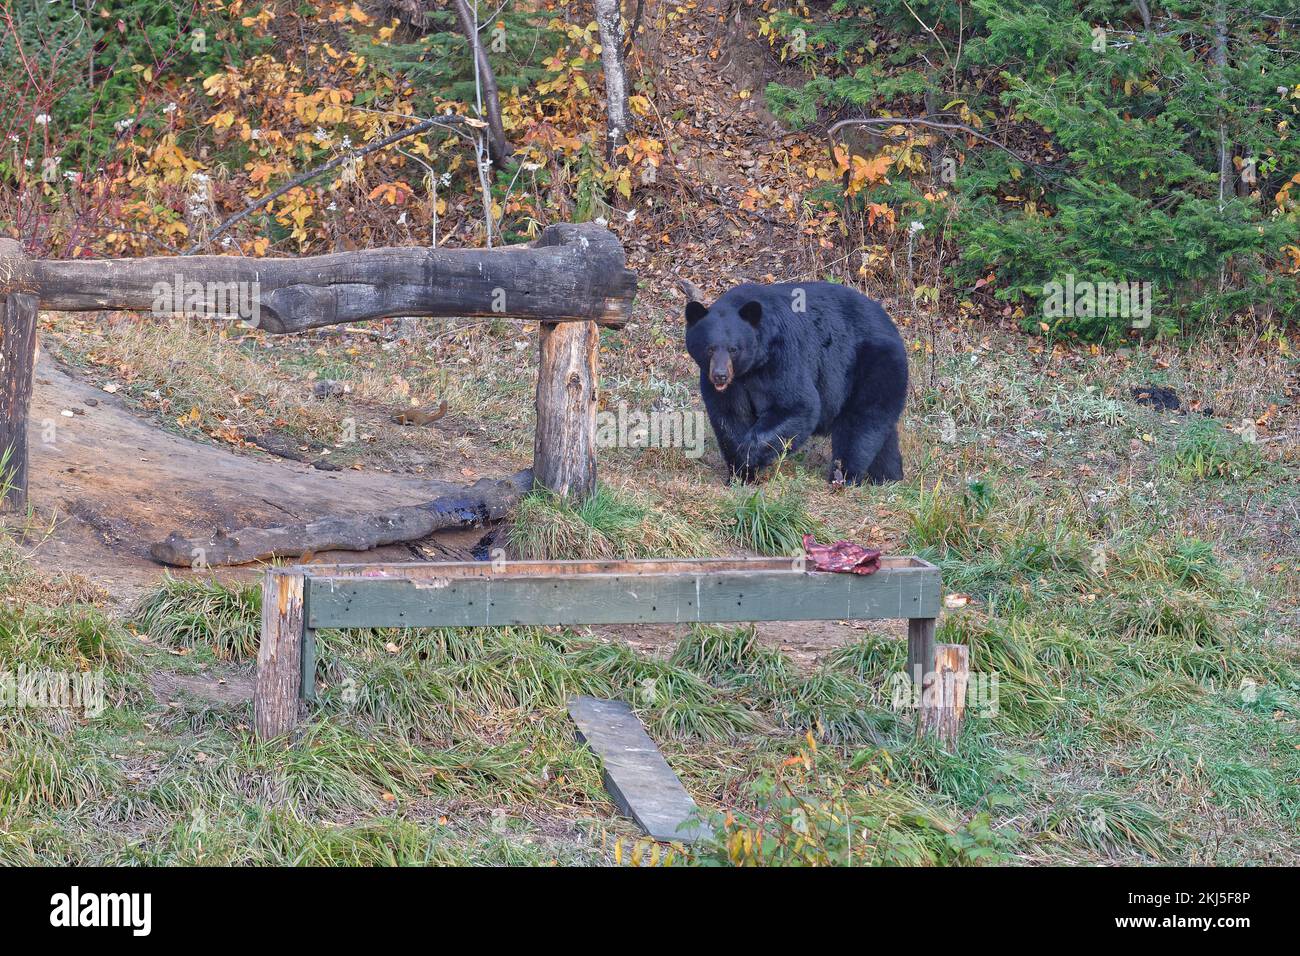 An american black bear (Ursus americanus), also called a baribal, in the forest of Quebec, Canada Stock Photo